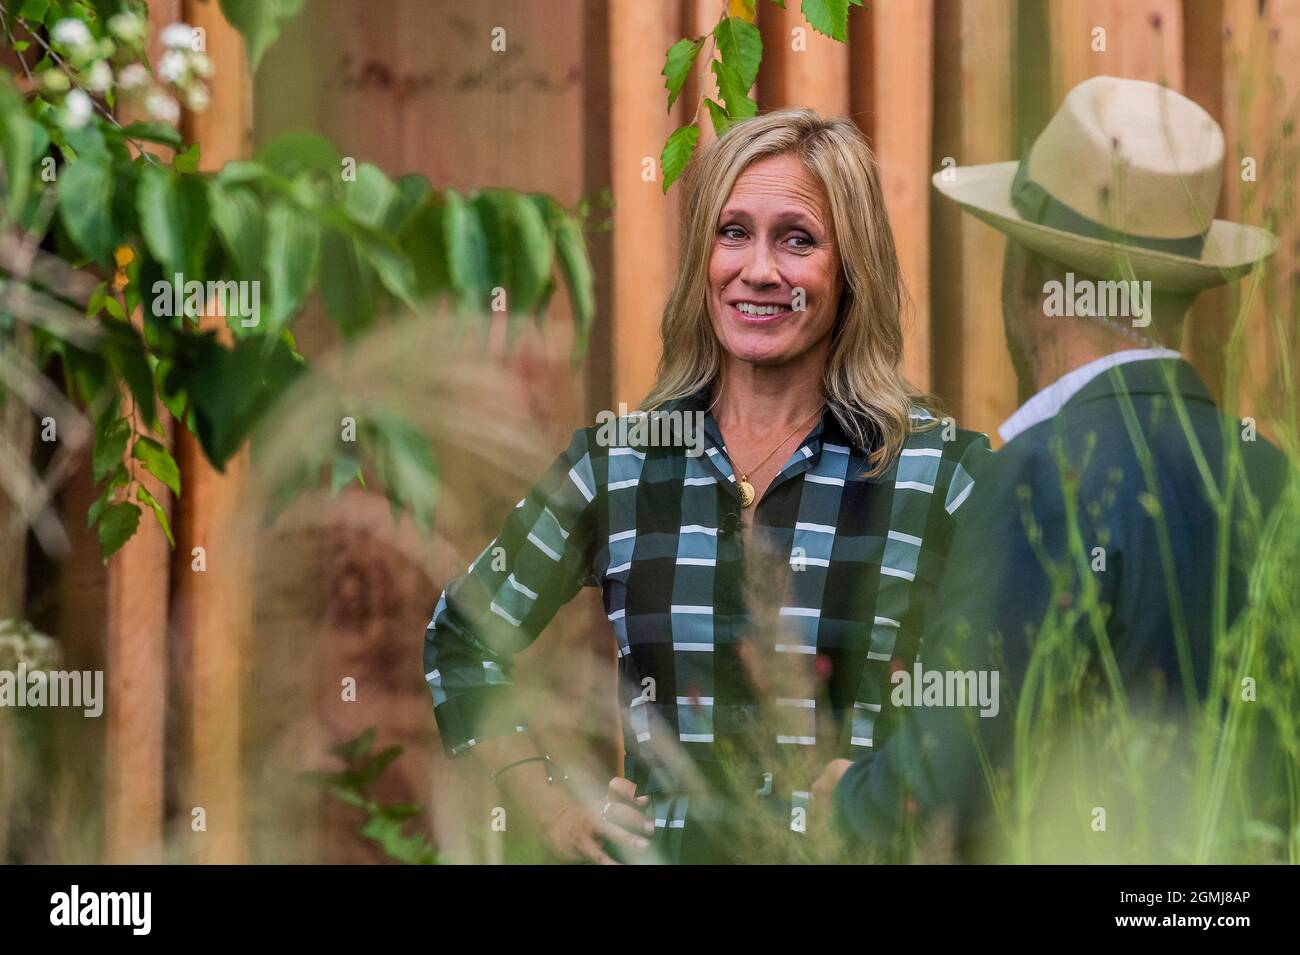 London, UK. 19th Sep, 2021. Sophie Raworth on The Florence Nightingale Garden: A Celebration of Modern-Day Nursing Designed by Robert Myers - Final Preparations for the 2021 Chelsea Flower Show. The show was cancelled last year due to the coronavirus lockdowns. Credit: Guy Bell/Alamy Live News Stock Photo